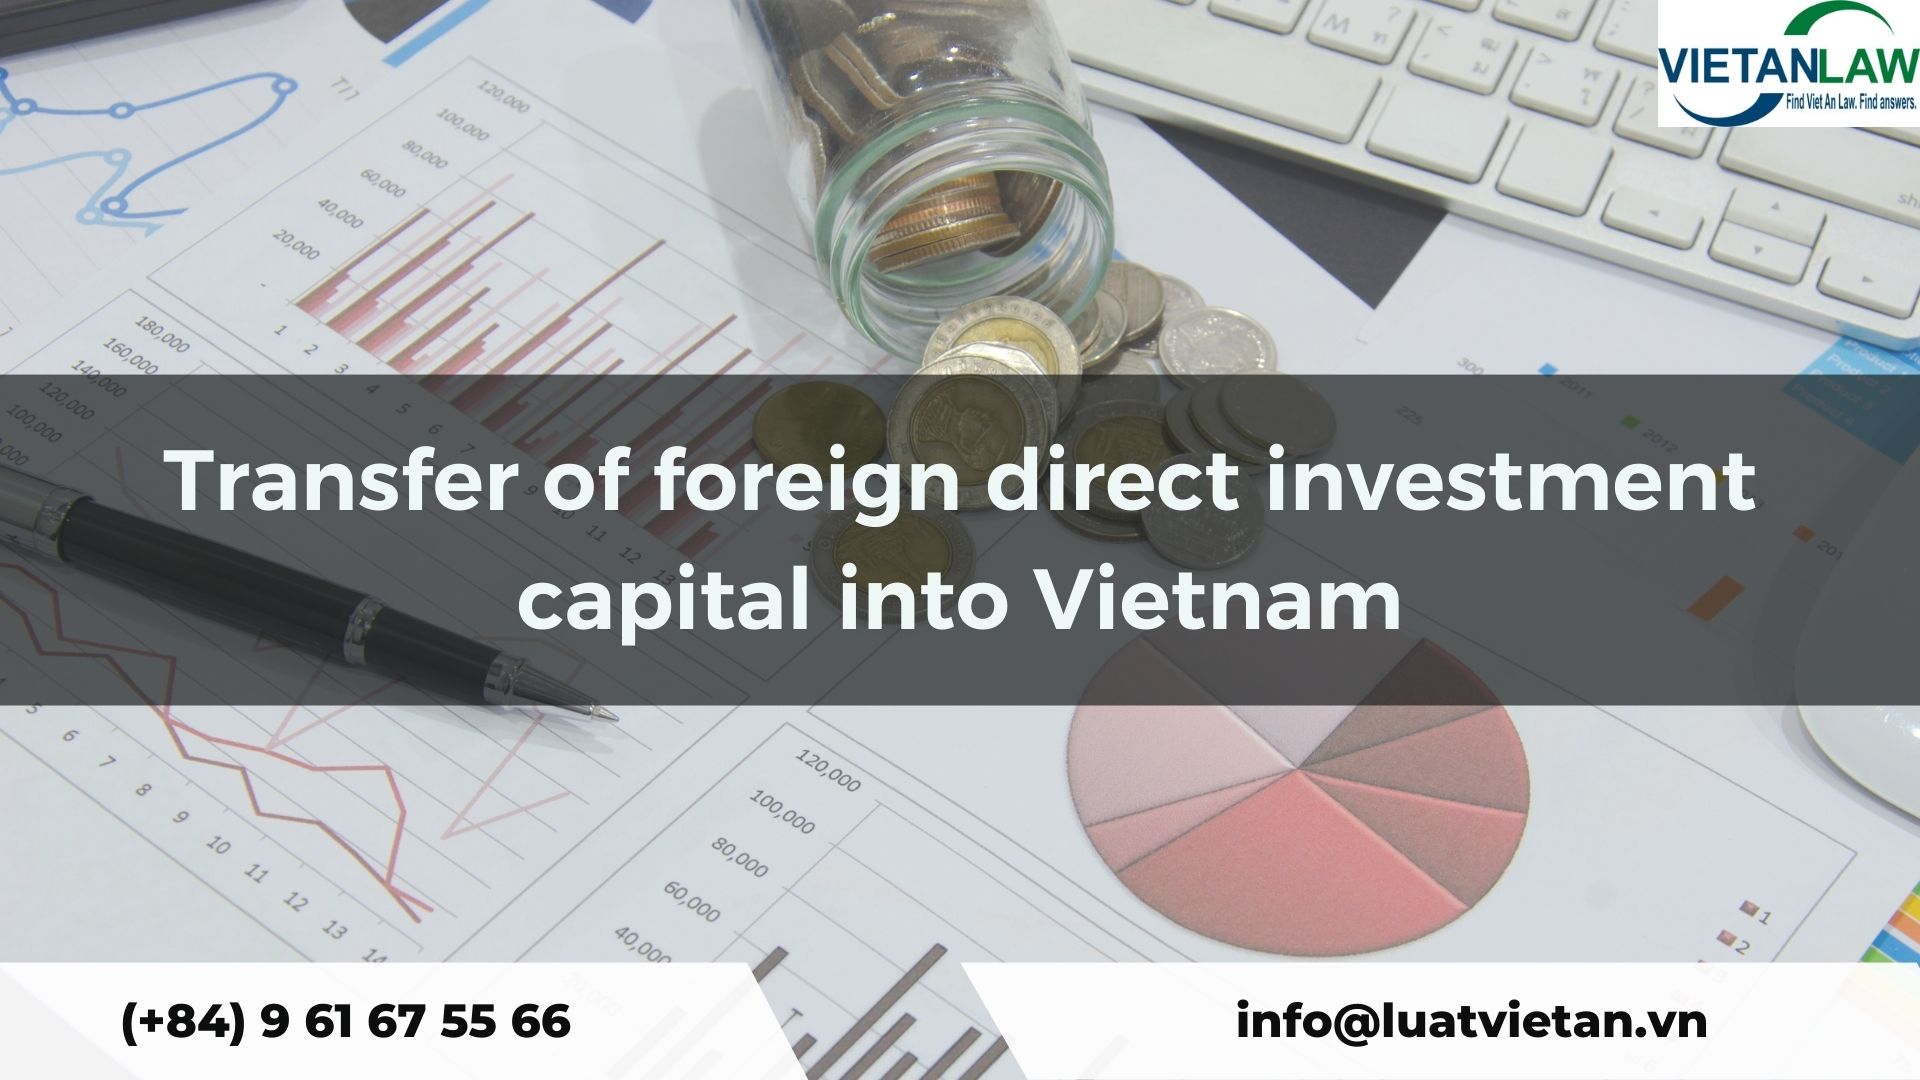 Transfer of foreign direct investment capital into Vietnam